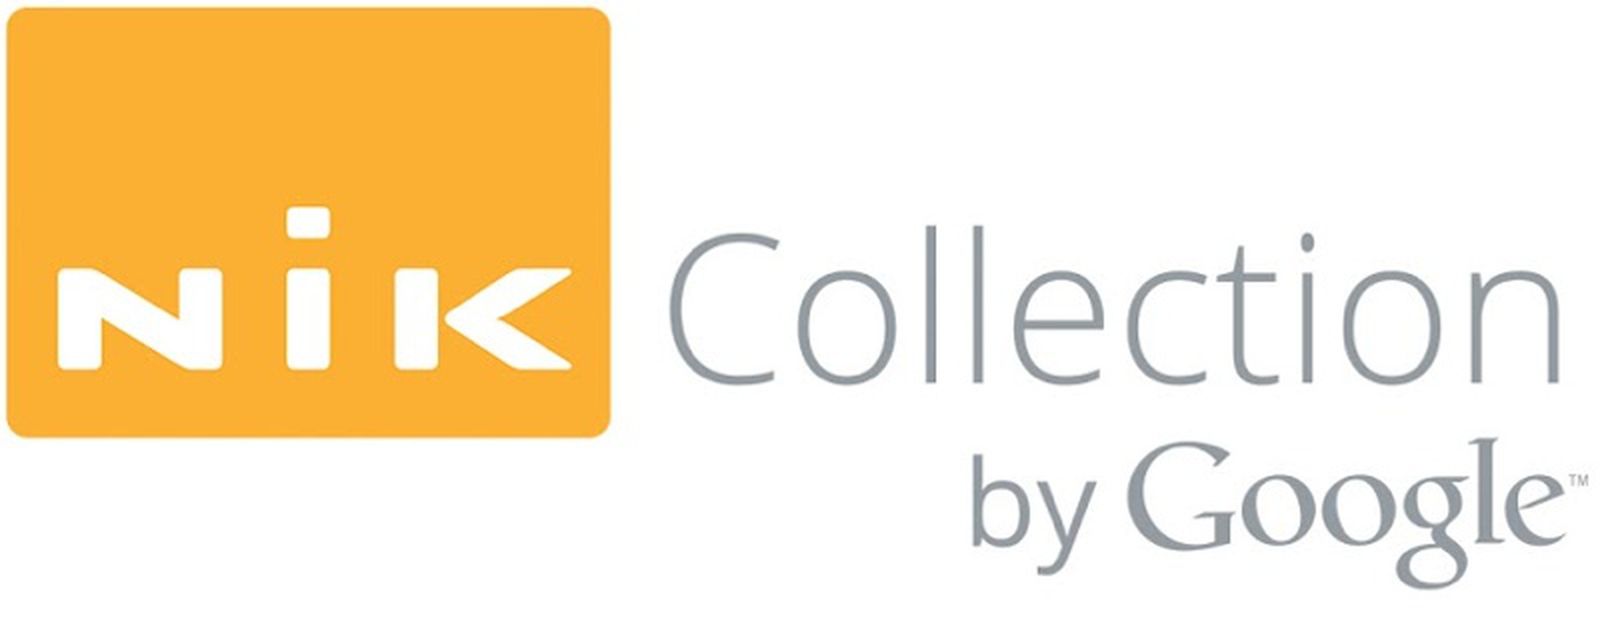 Google collections. Google Nik collection.